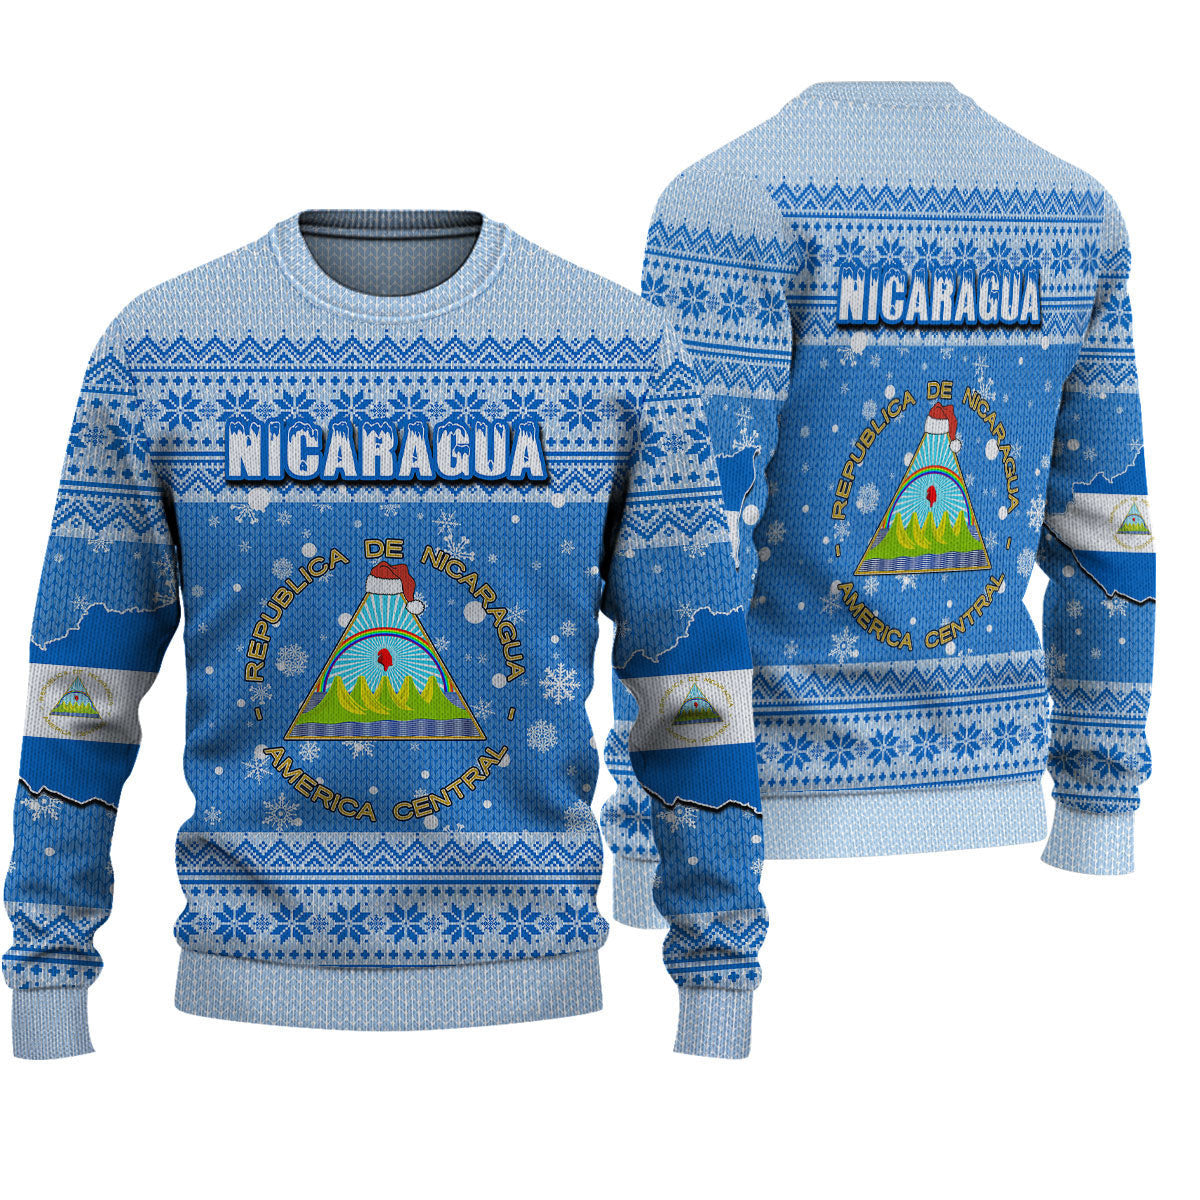 wonder-print-shop-ugly-sweater-nicaragua-christmas-knitted-sweater